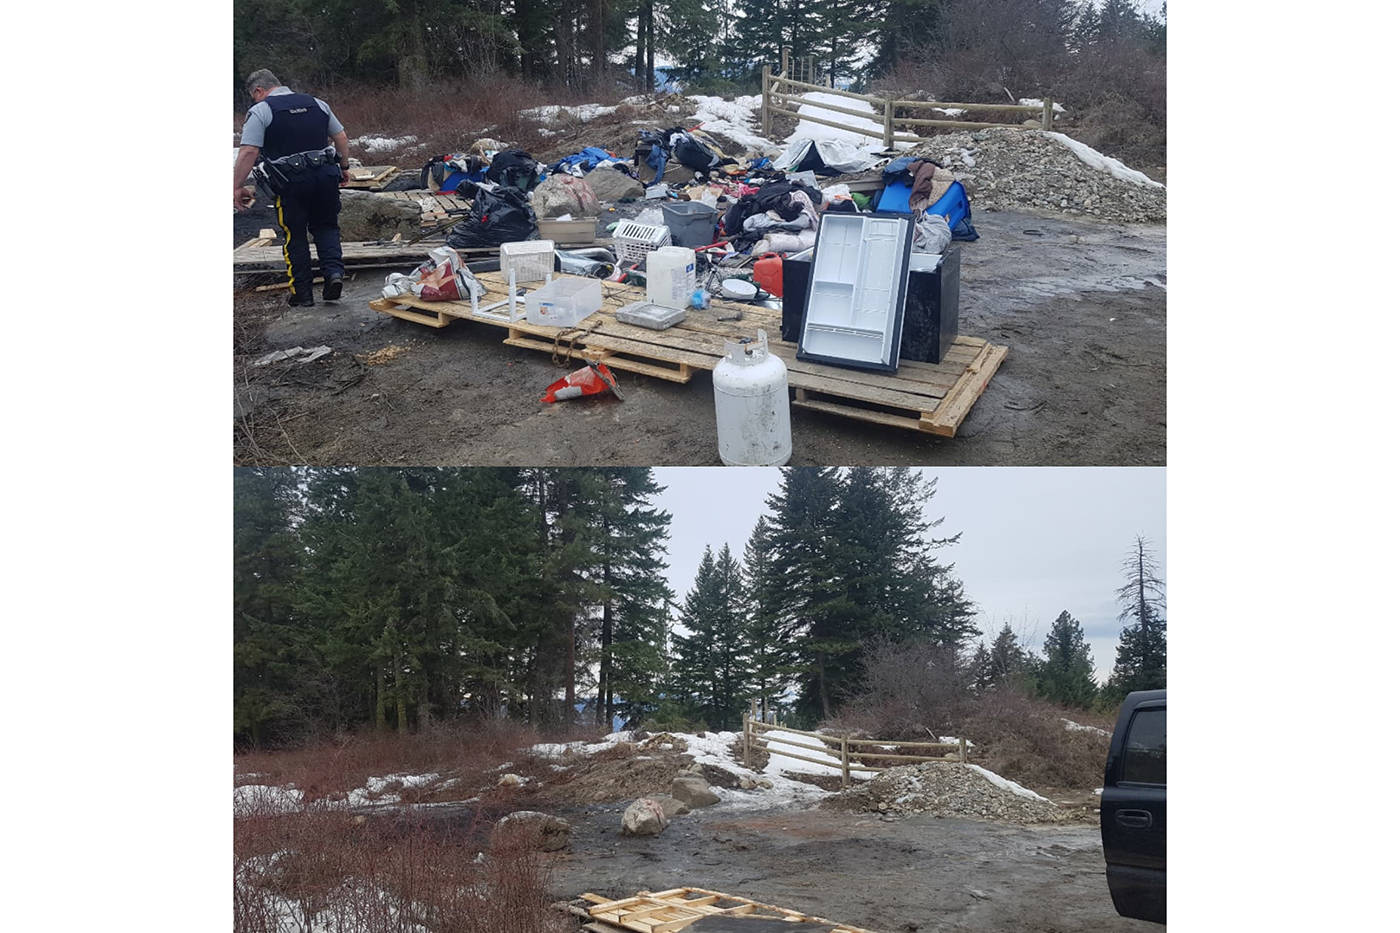 The Okanagan Forest Task Force cleaned over 1,400 pounds of garbage from Beaver Lake Road on March 14. Pictured above is before, and after cleanup. (Supplied/Kane Blake)